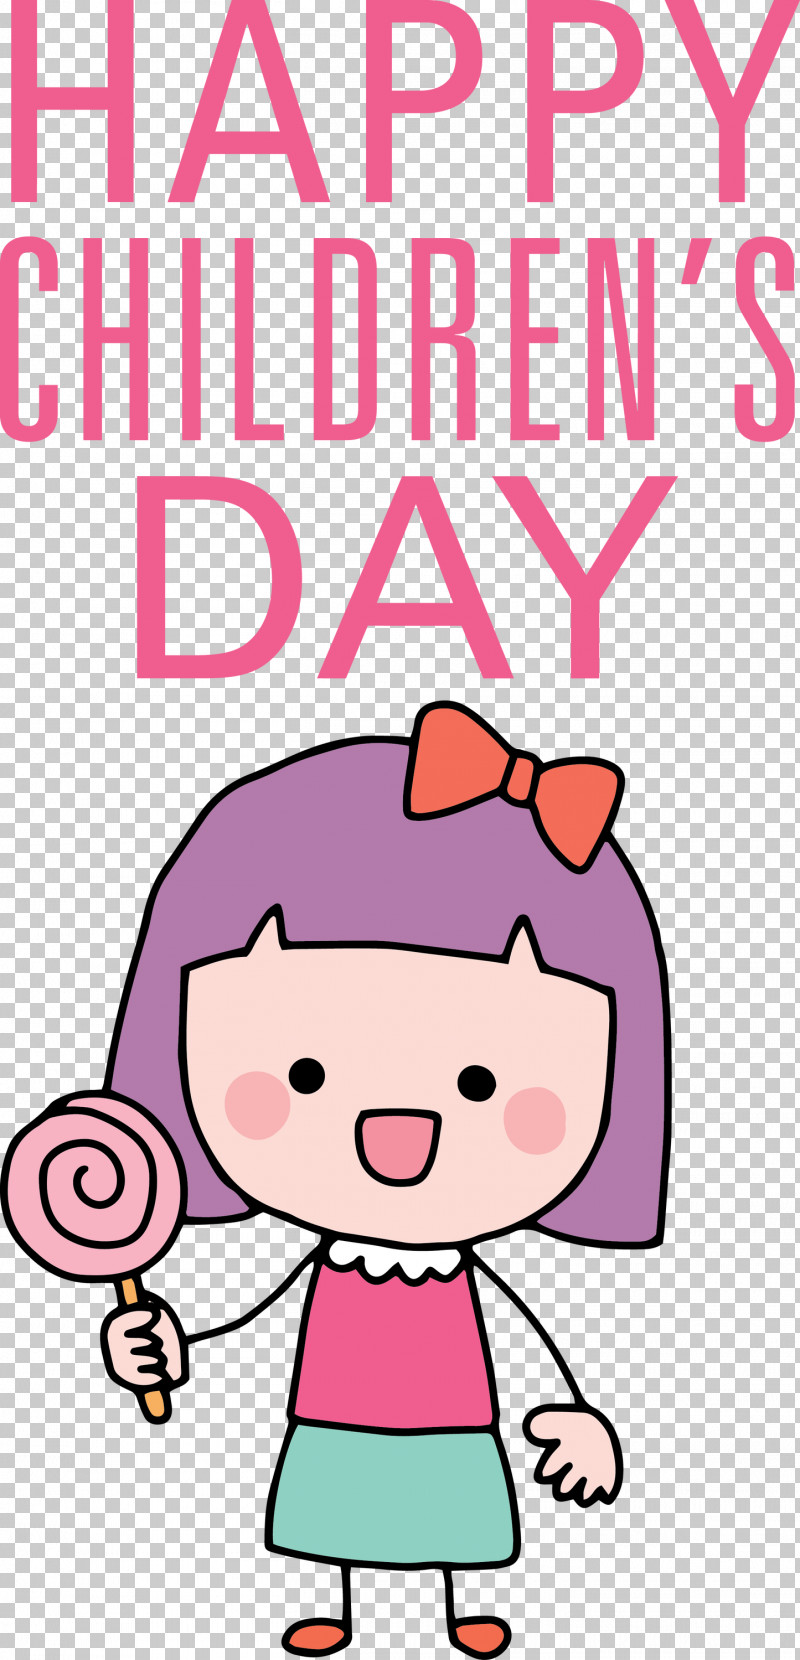 Cute Childrens Day Banner PNG, Clipart, Cartoon, Happiness, Laughter Free PNG Download